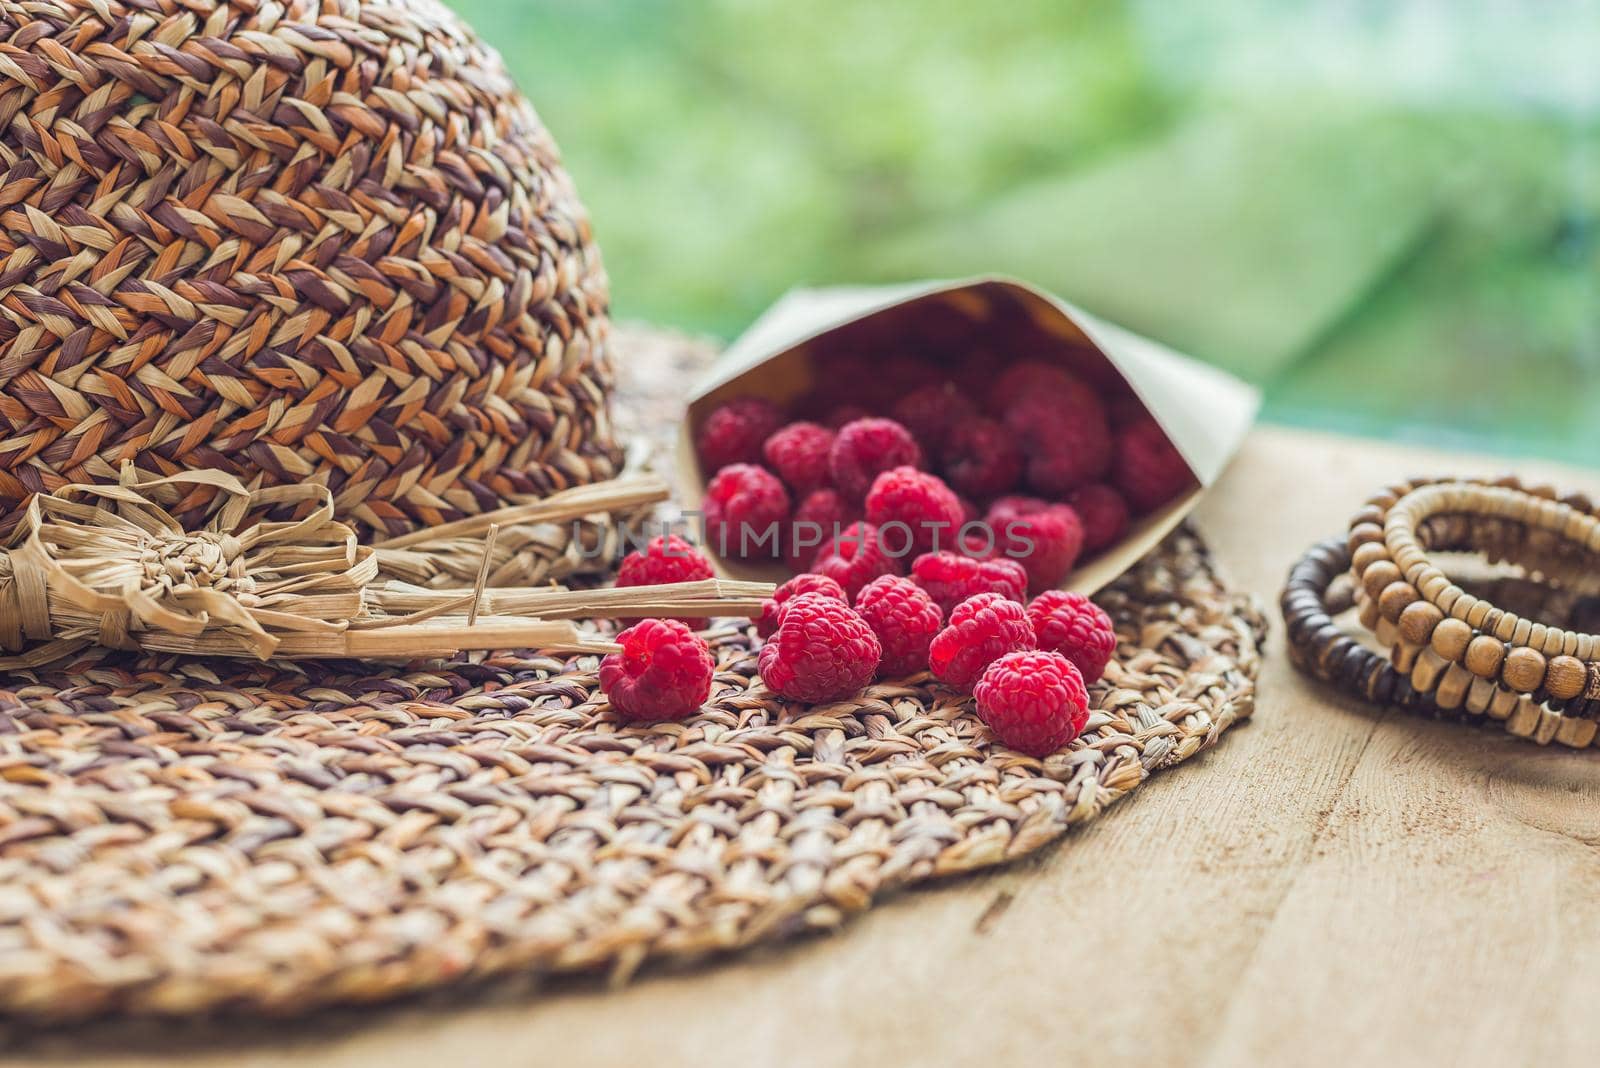 Summer holiday, vacation, relaxation concept. Raspberries, straw hat. Free text copy space. Summer vibes concept by galitskaya